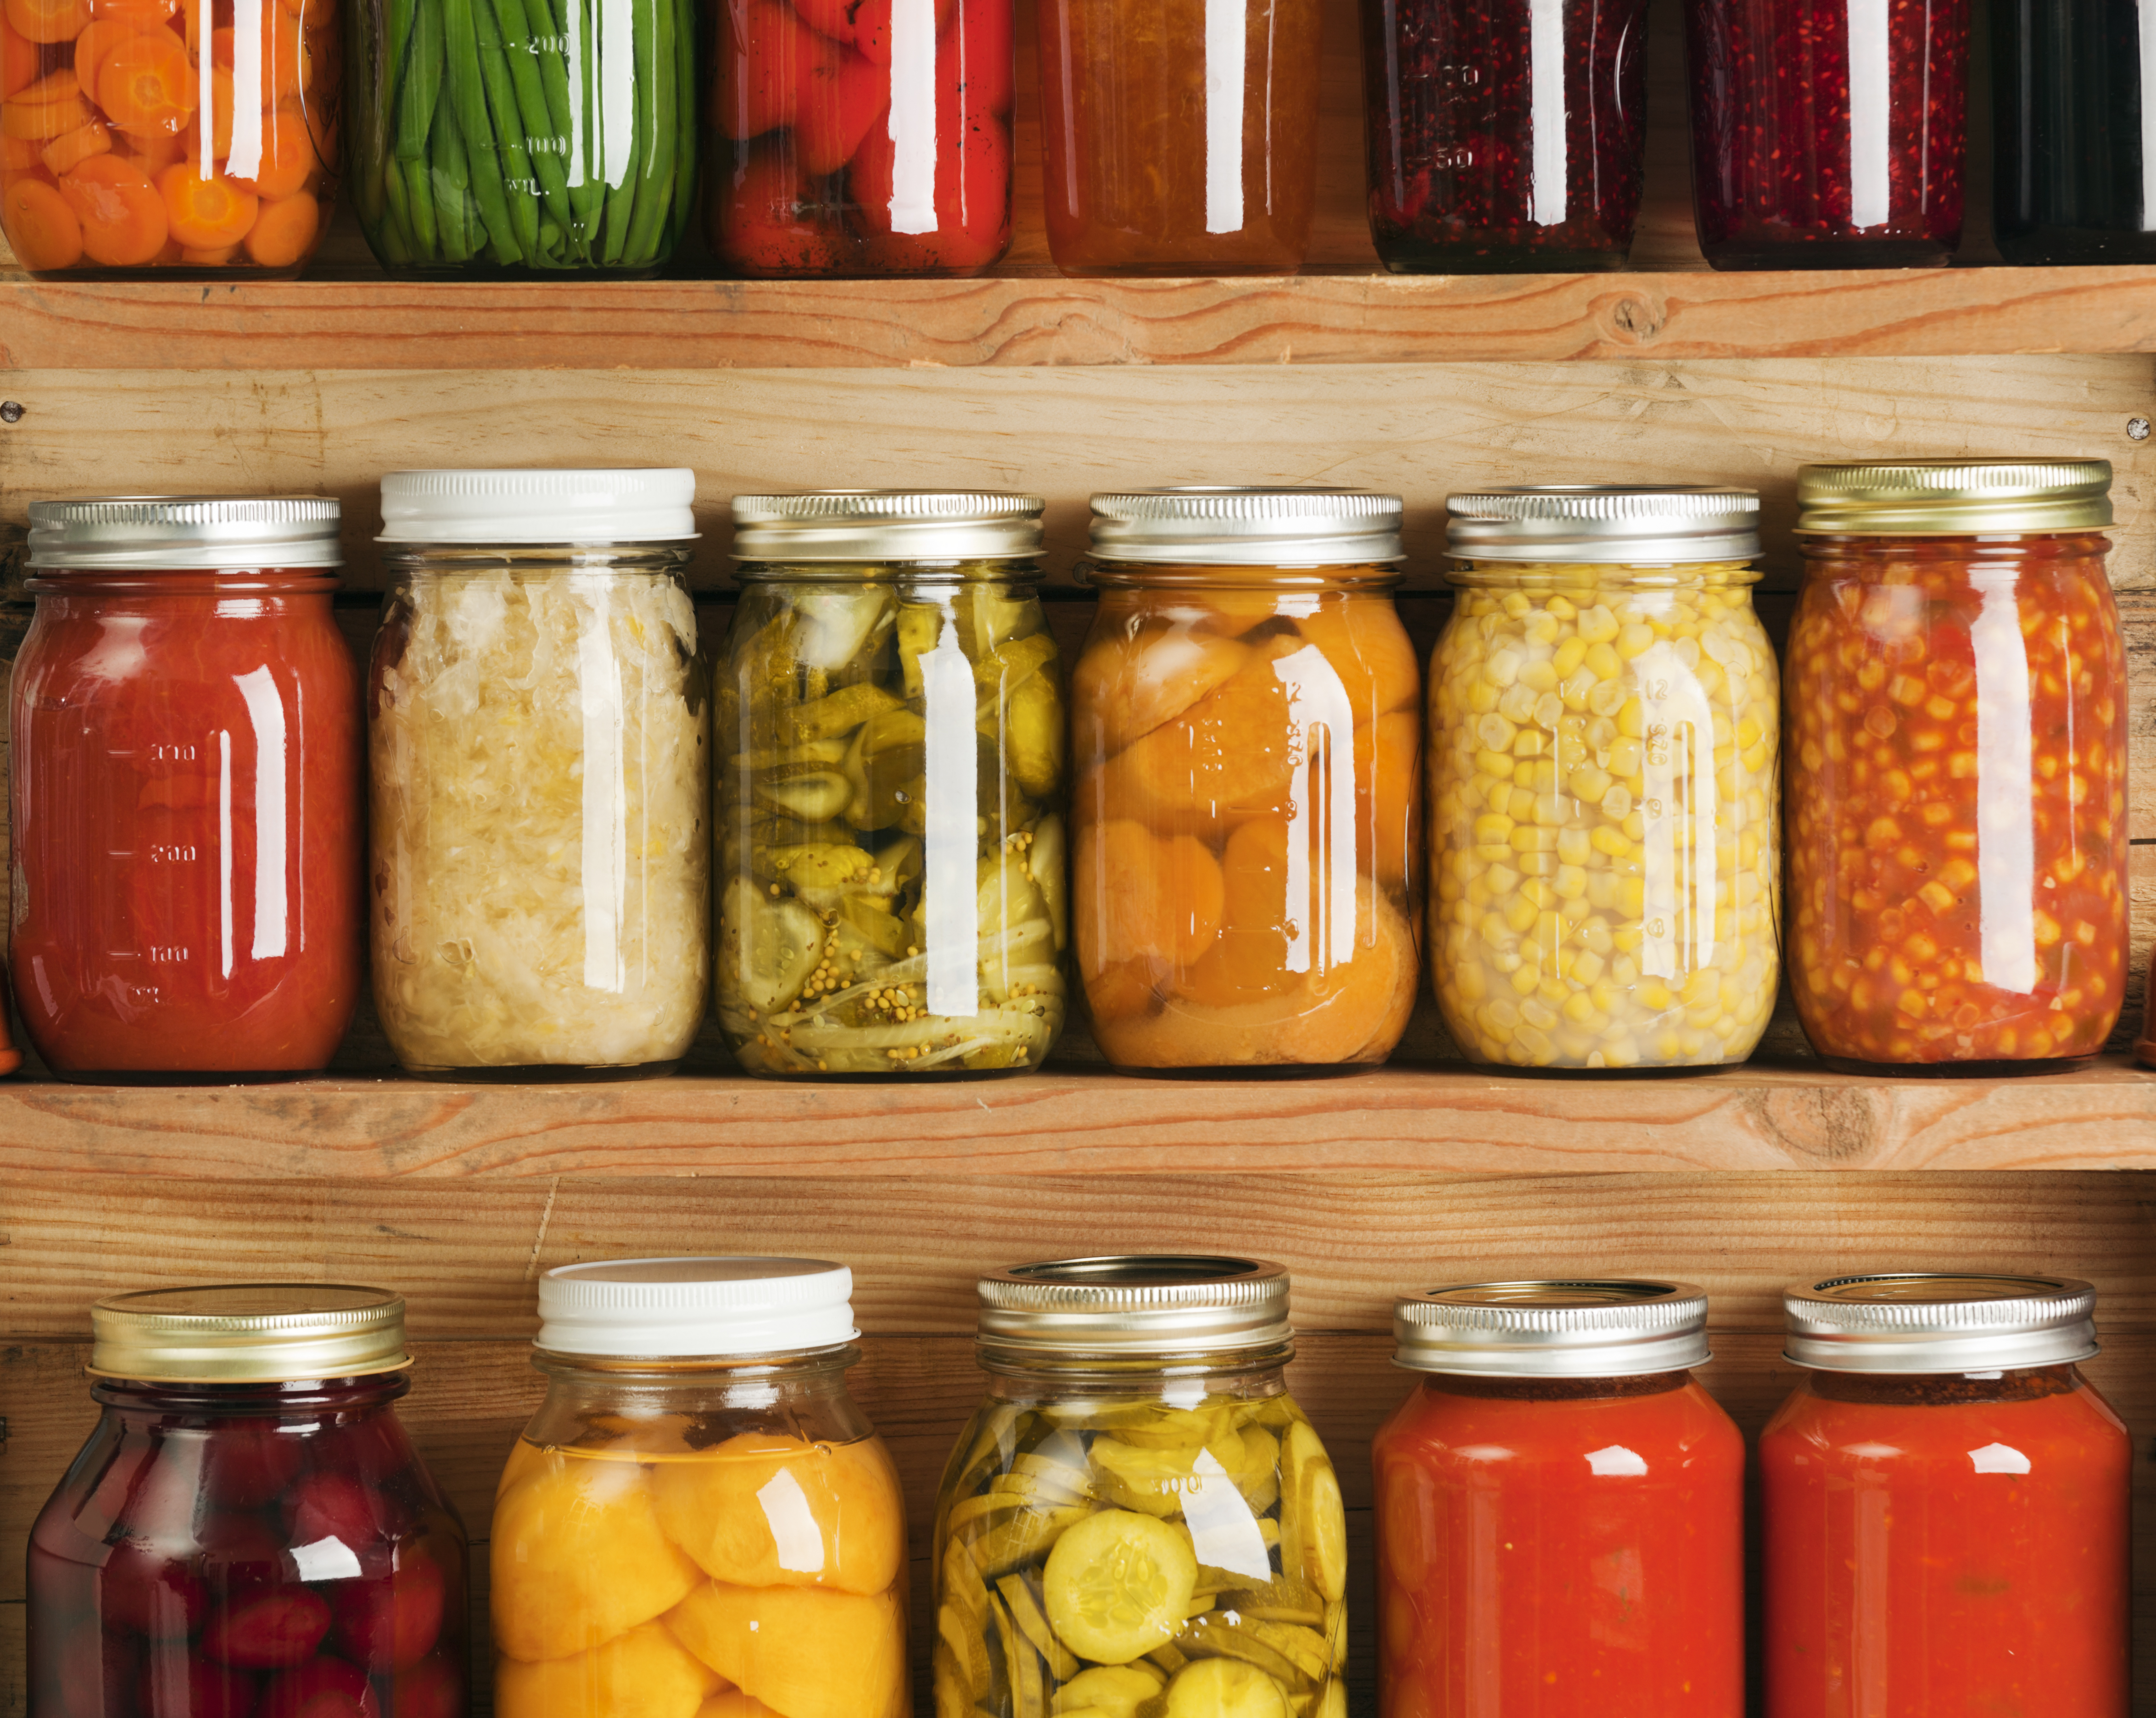 Re-using jars from store-bought products - Healthy Canning in Partnership  with Canning for beginners, safely by the book